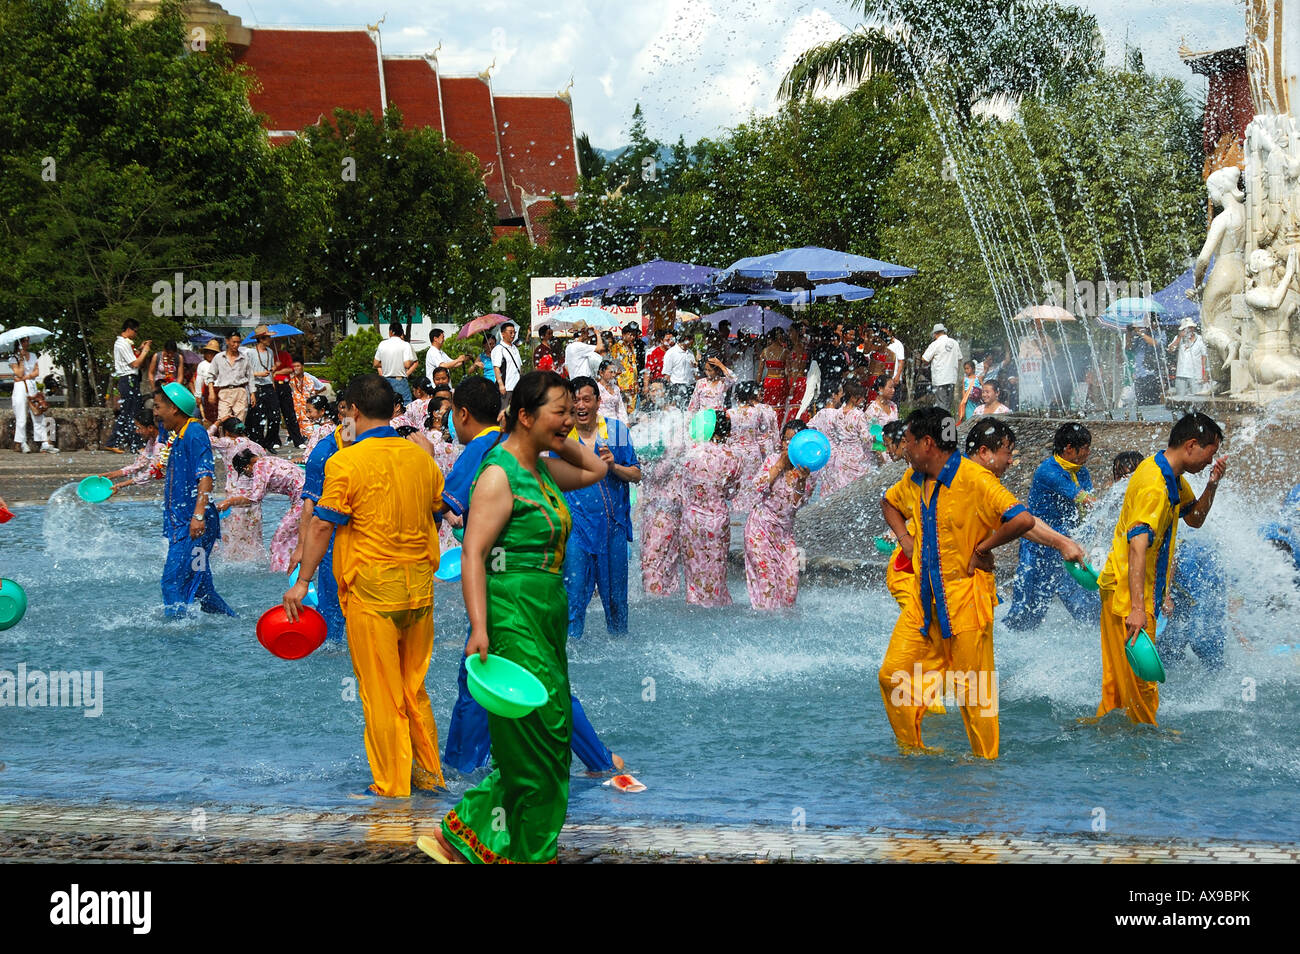 Festival in a Dai village, people splash water at each other for good luck. Xishuanbanna, Yunnan, China Stock Photo